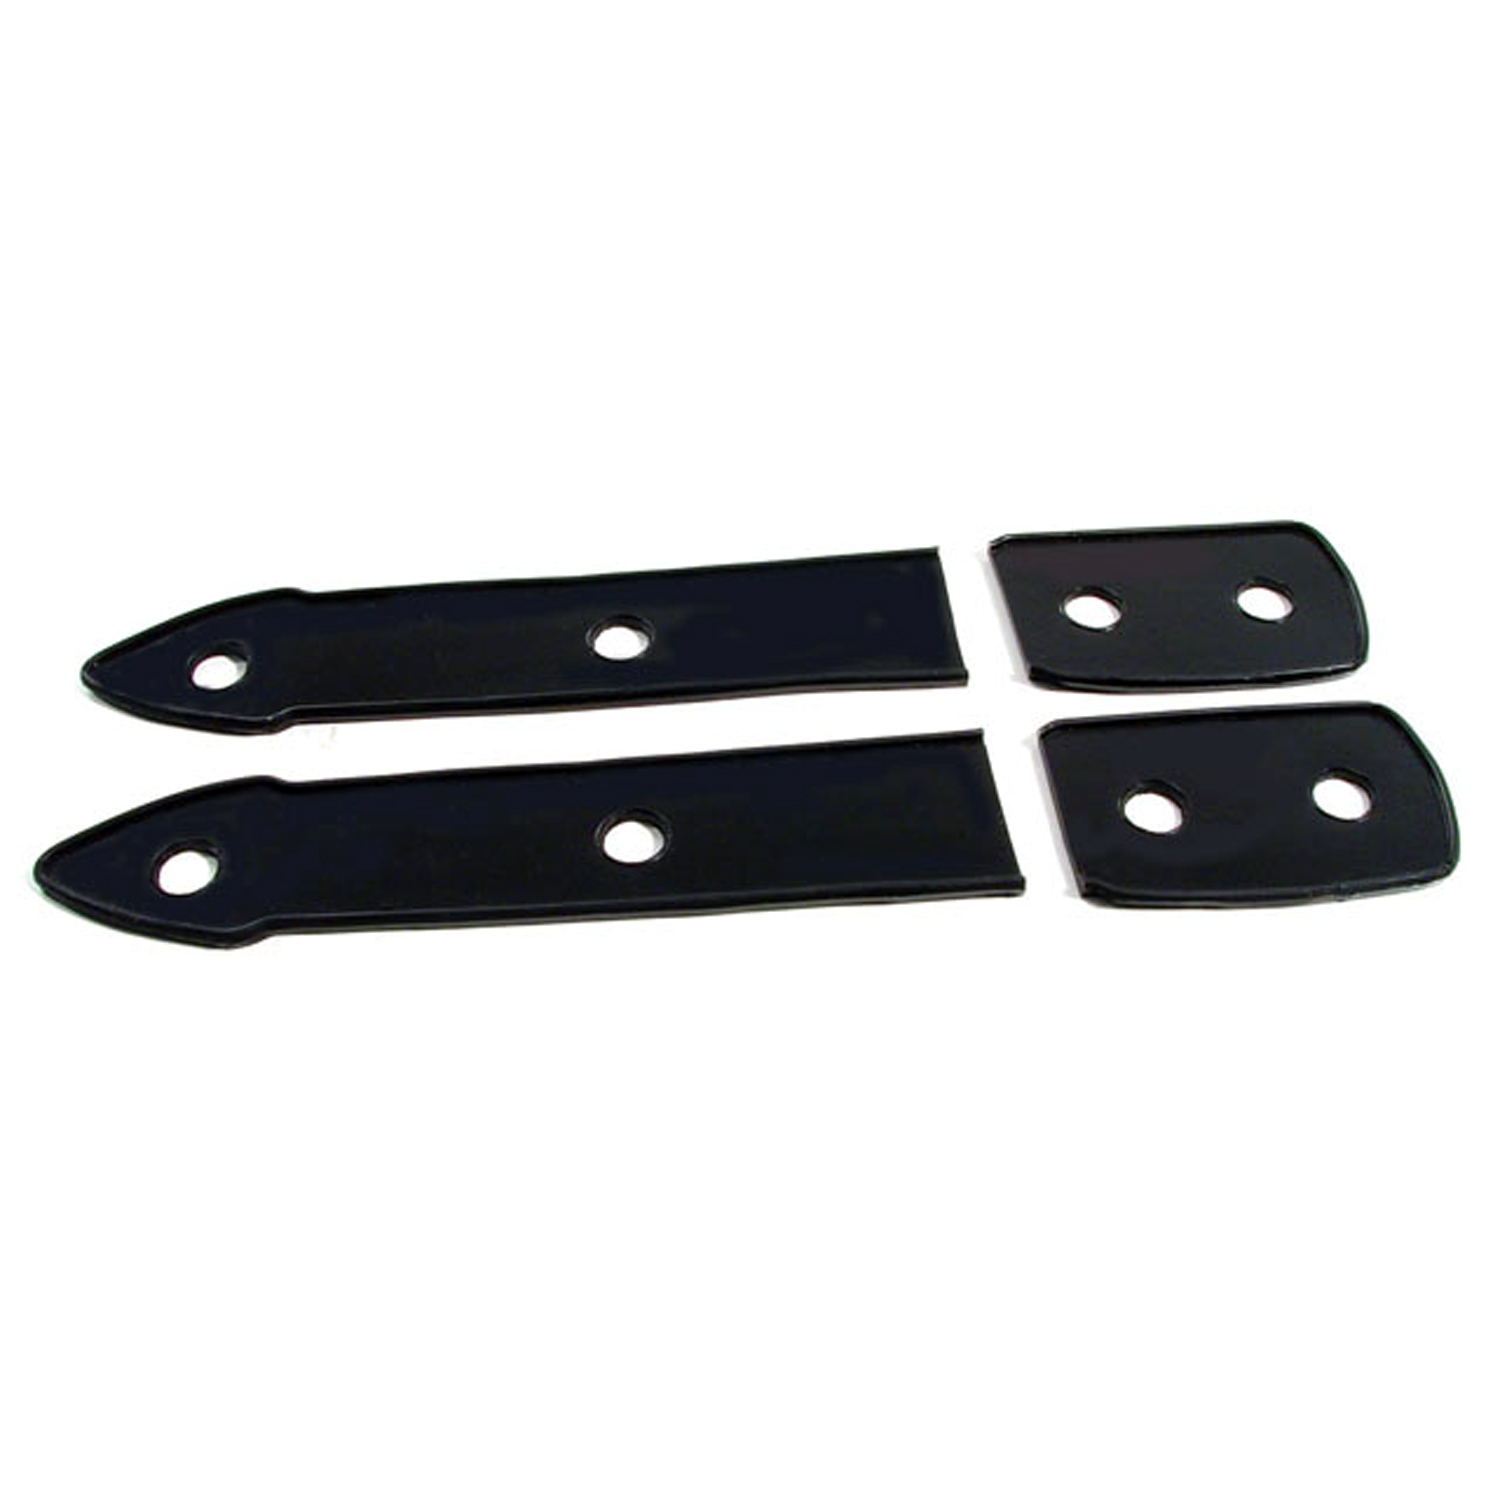 1937 Buick Special 40 Trunk Hinge Pads.  1-5/8 wide X 8-3/8 long.  4-Piece Set-MP 335-B